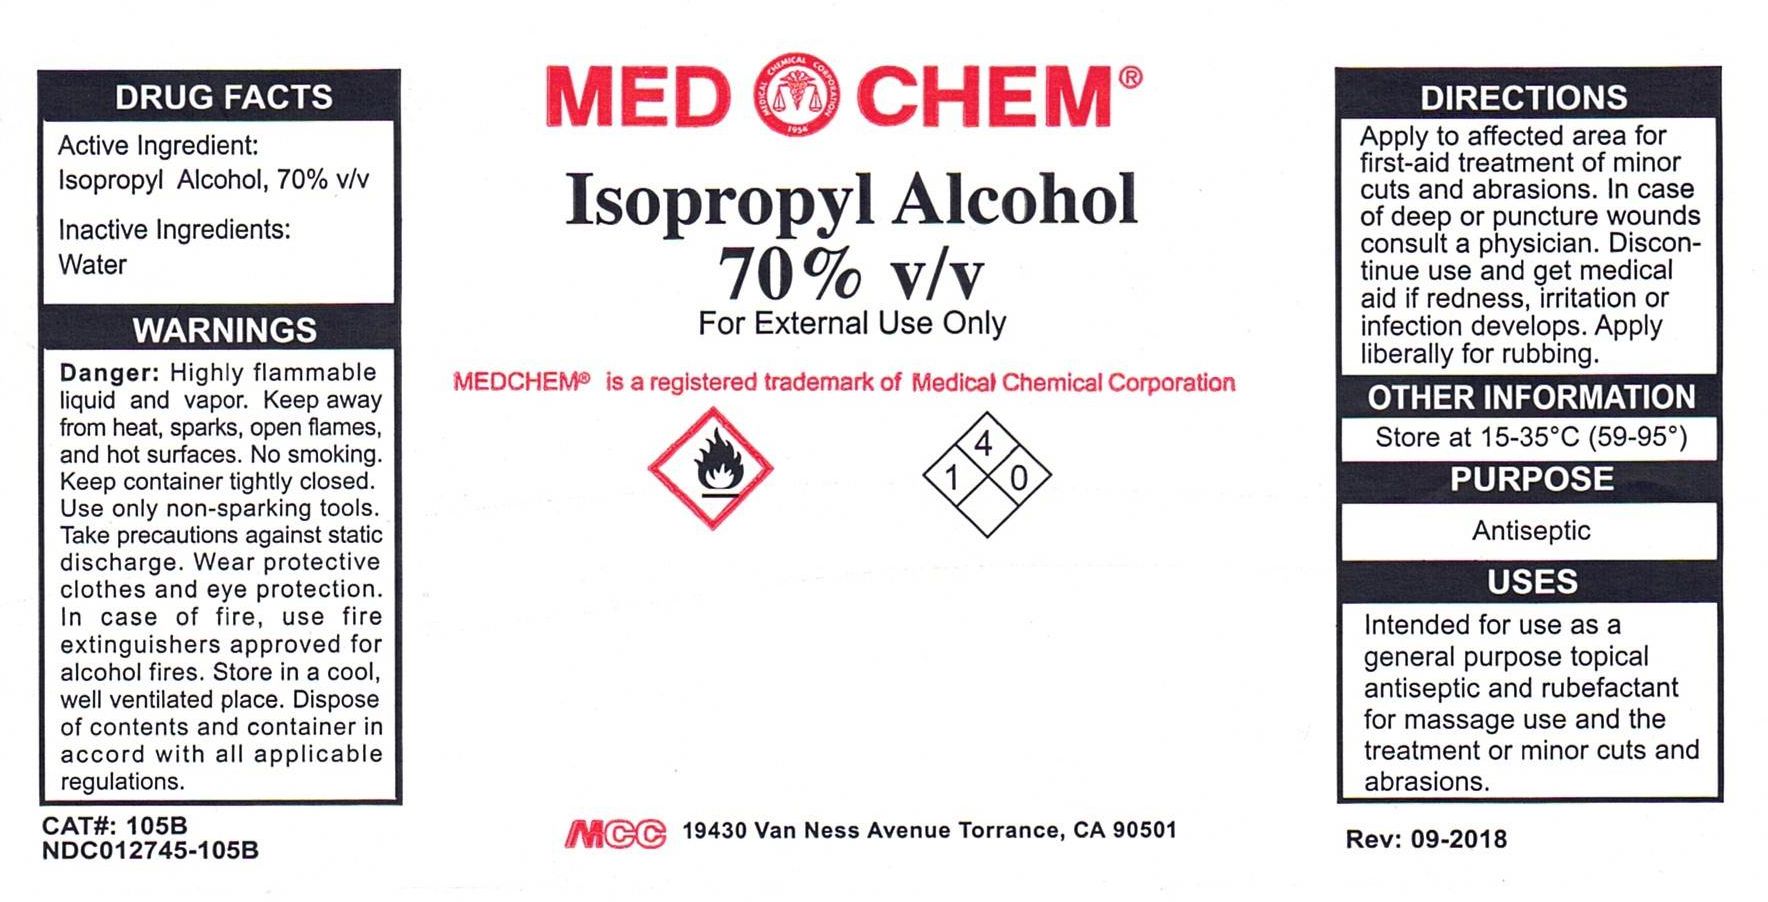 What Are the Uses of Isopropyl Alcohol?